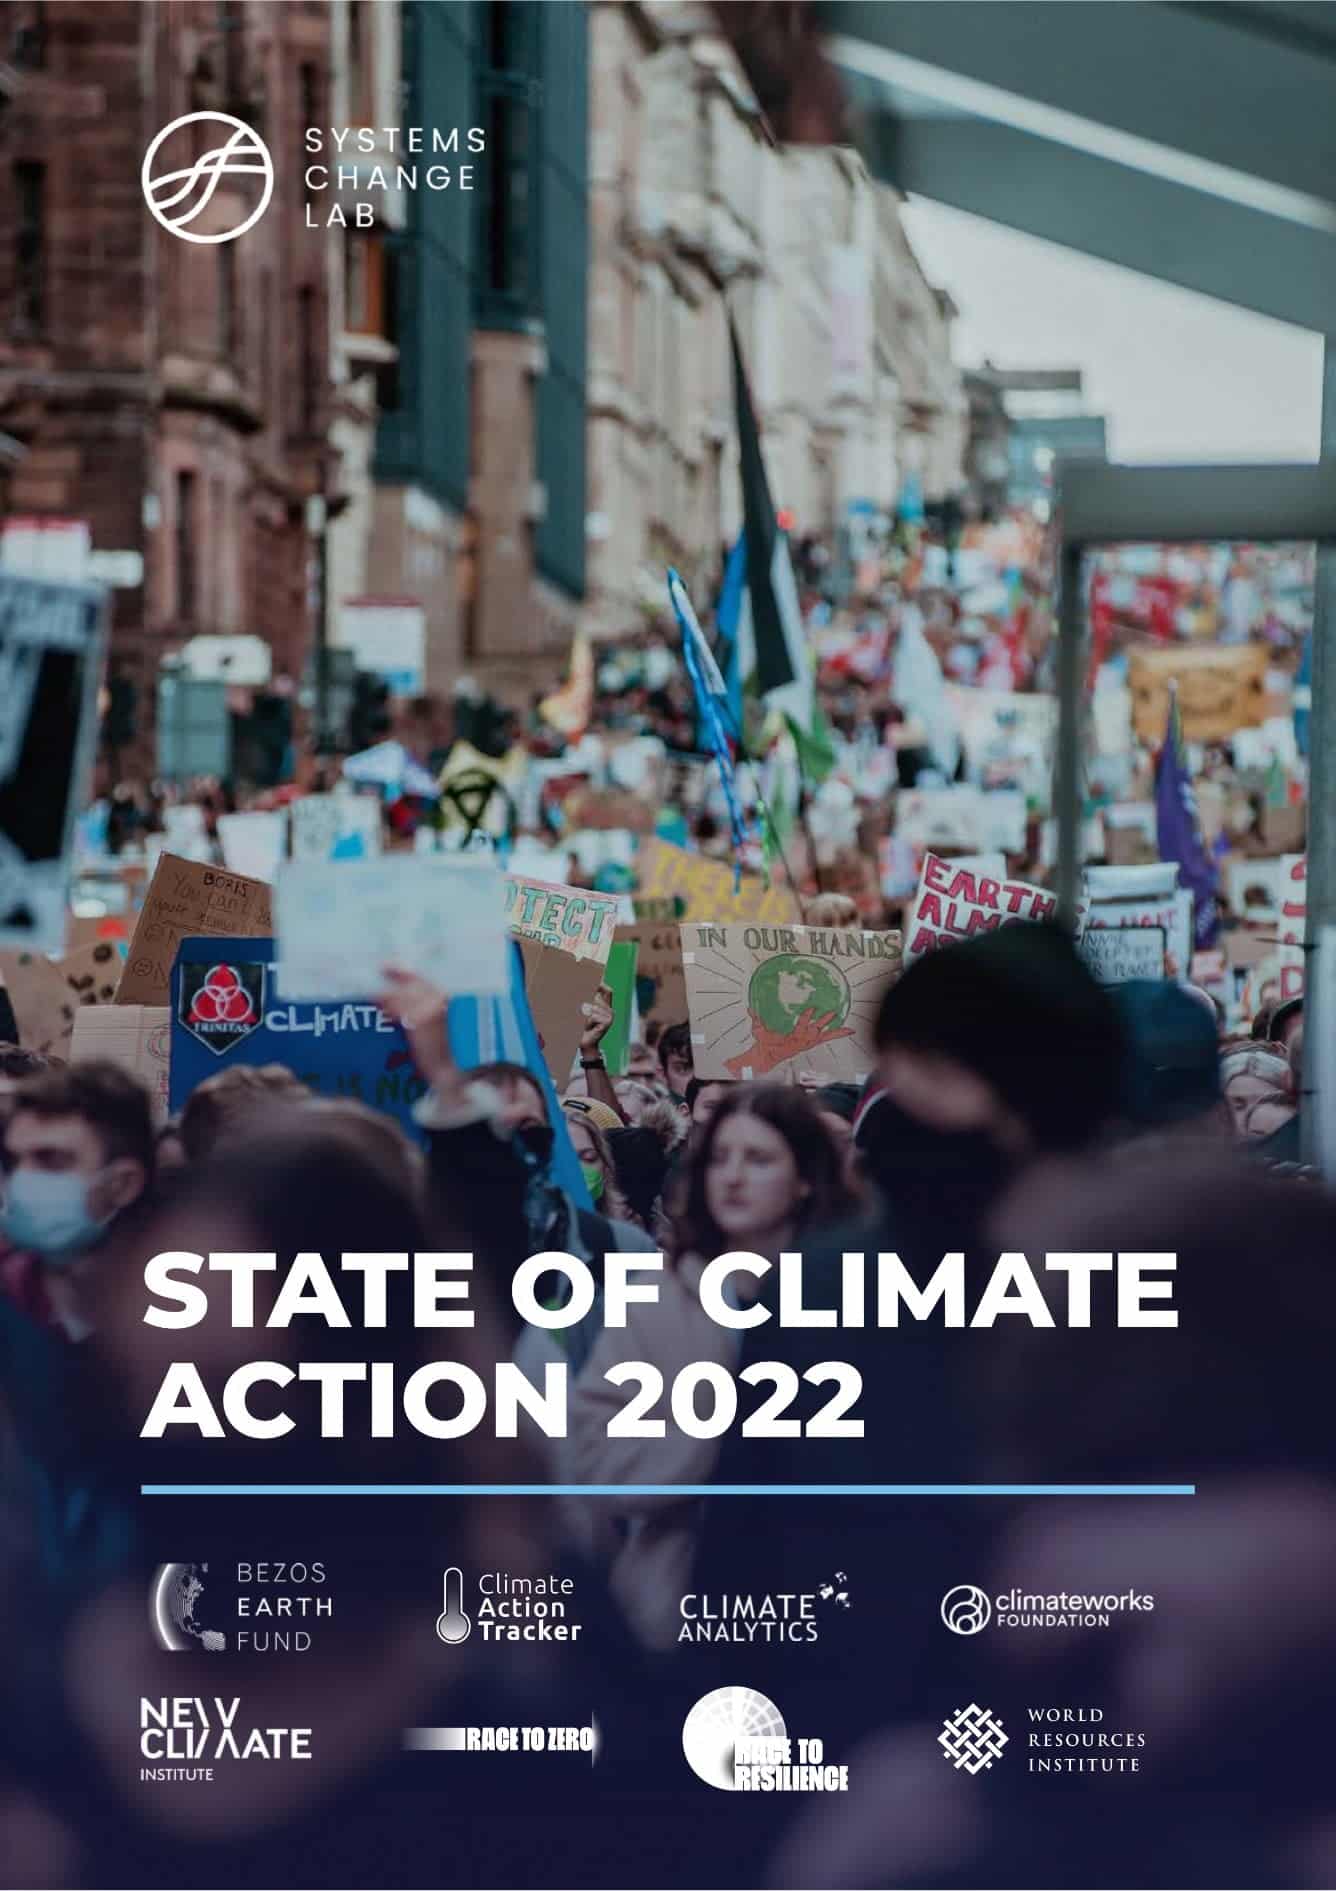 thefuture, CAT, Reports, State of Climate Action 2022